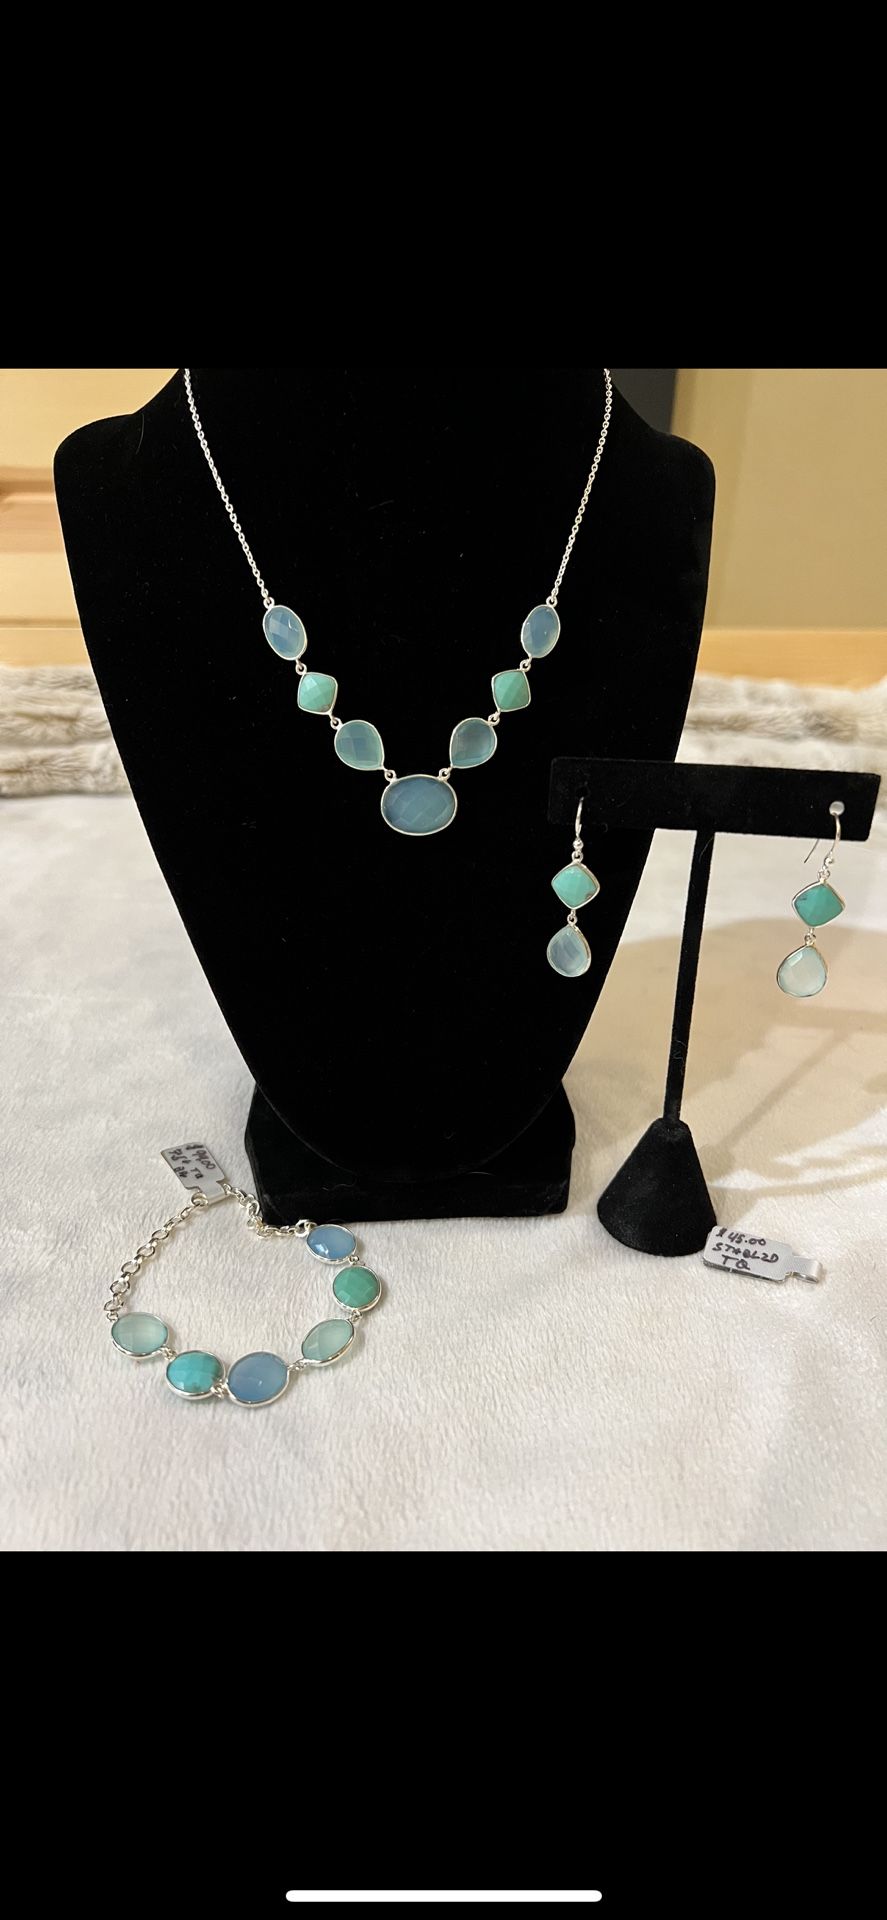 Stabilized Turquoise and Chalcedony Necklace, Bracelet and Earring Set .925 Sterling Silver